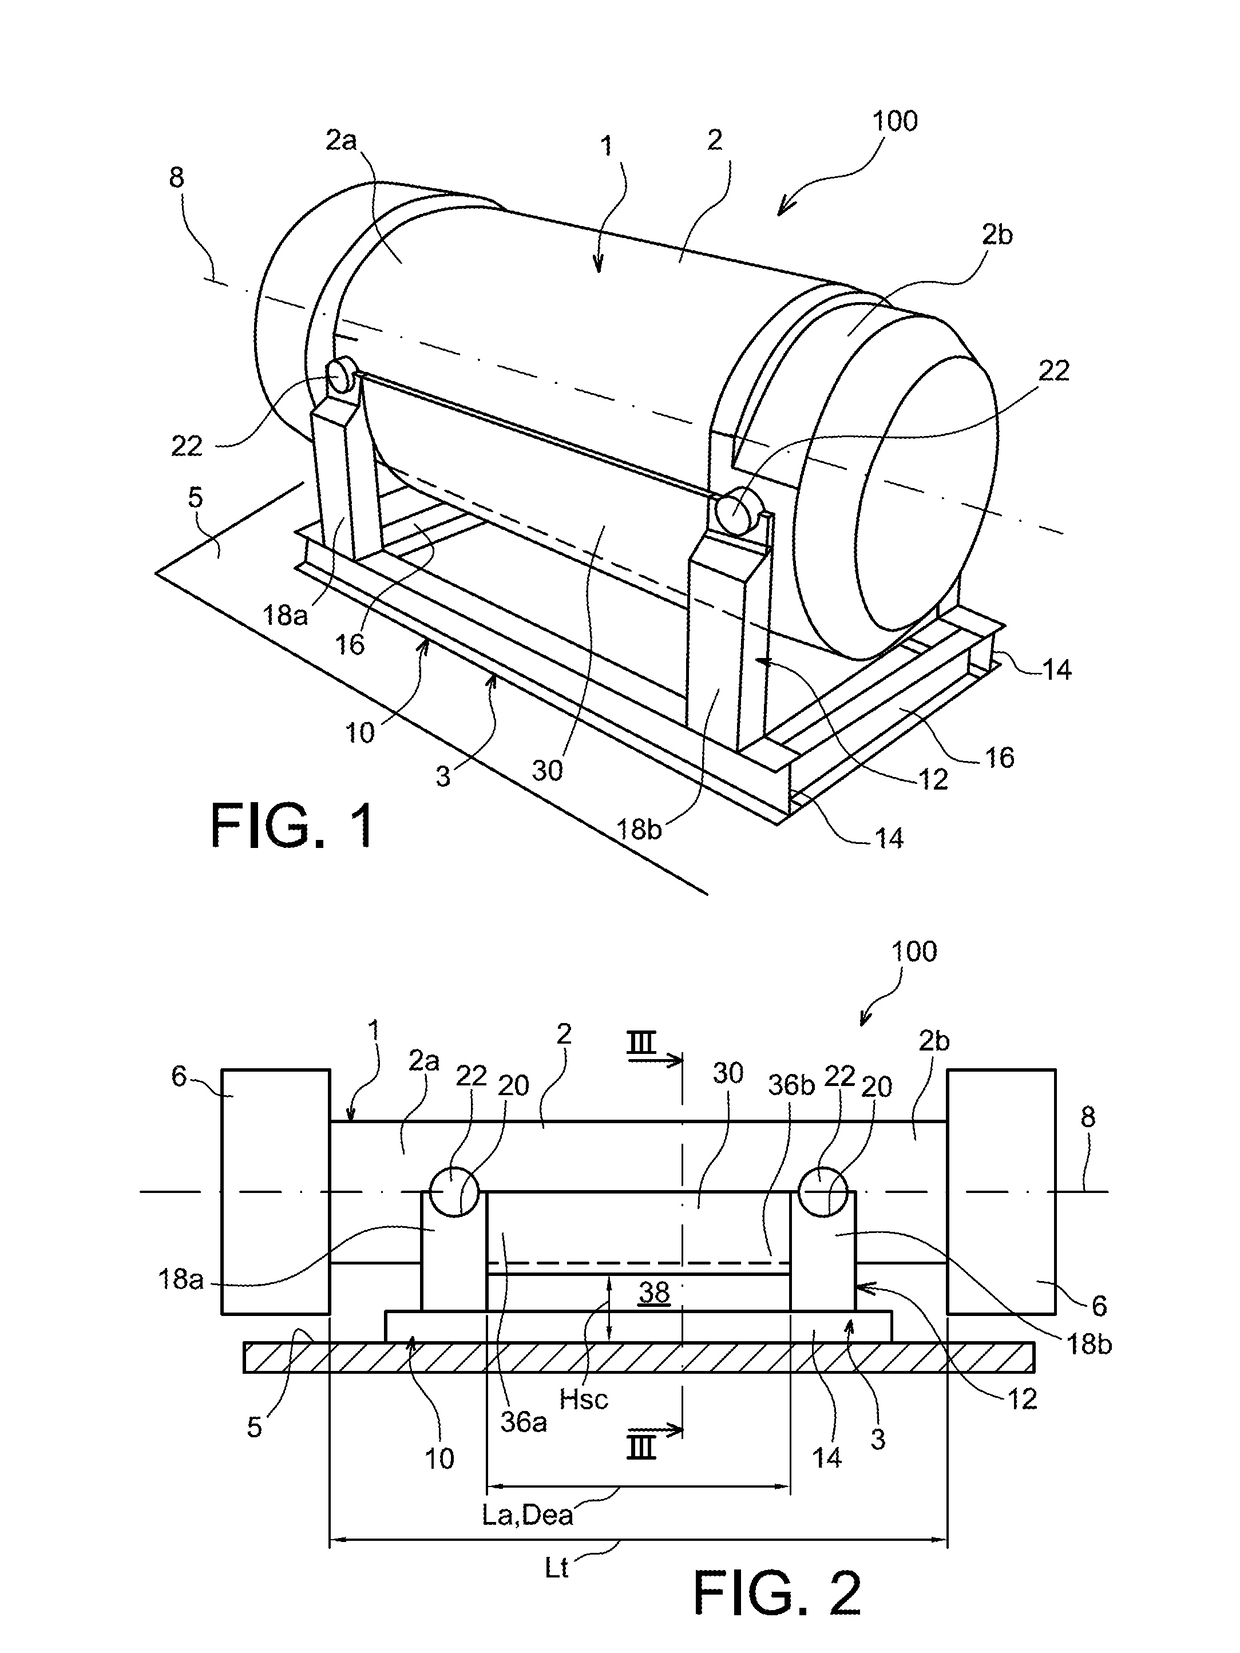 Device for supporting packaging for transporting/storing radioactive materials, including a shroud for guiding air for cooling the packaging by natural convection